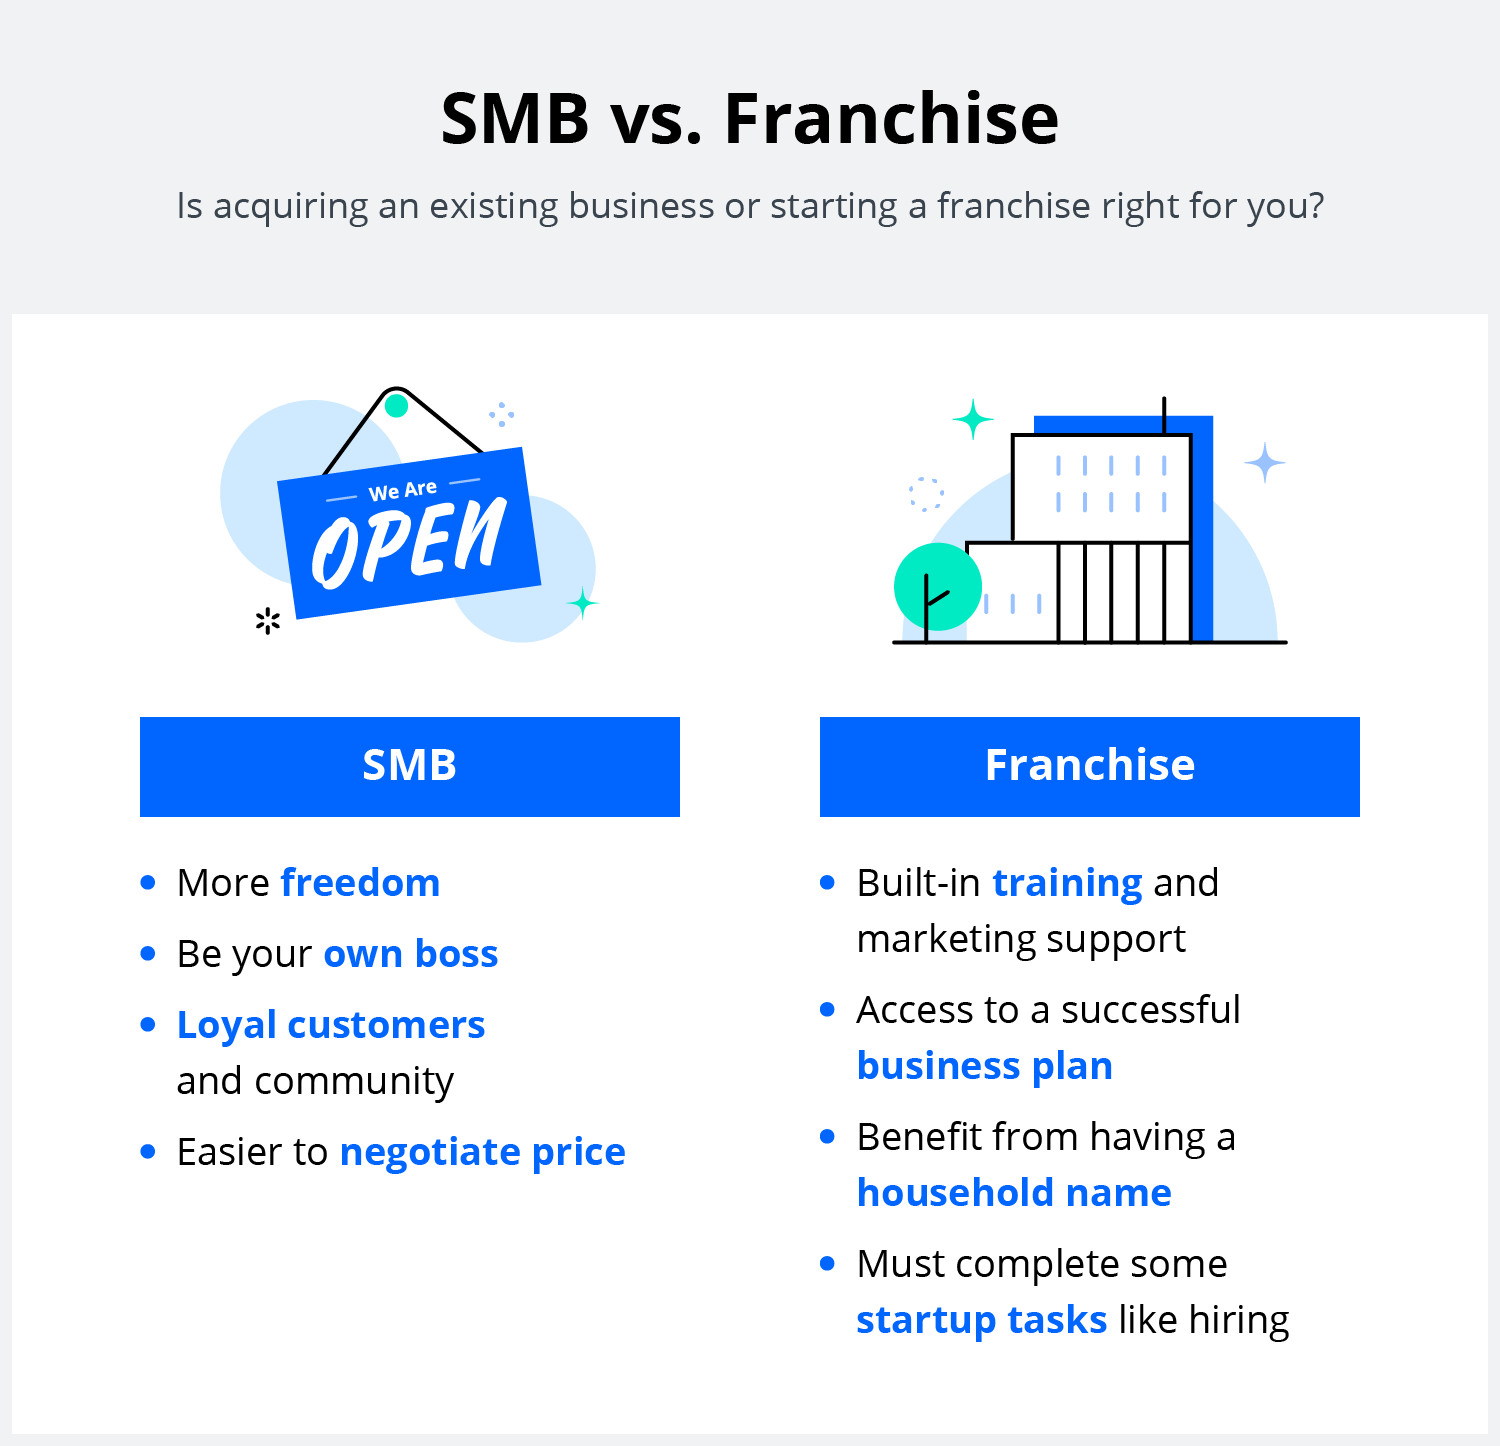 Small businesses vs franchises can be different to acquire as a business owner. Small businesses offer more freedom, while franchises offer more support.